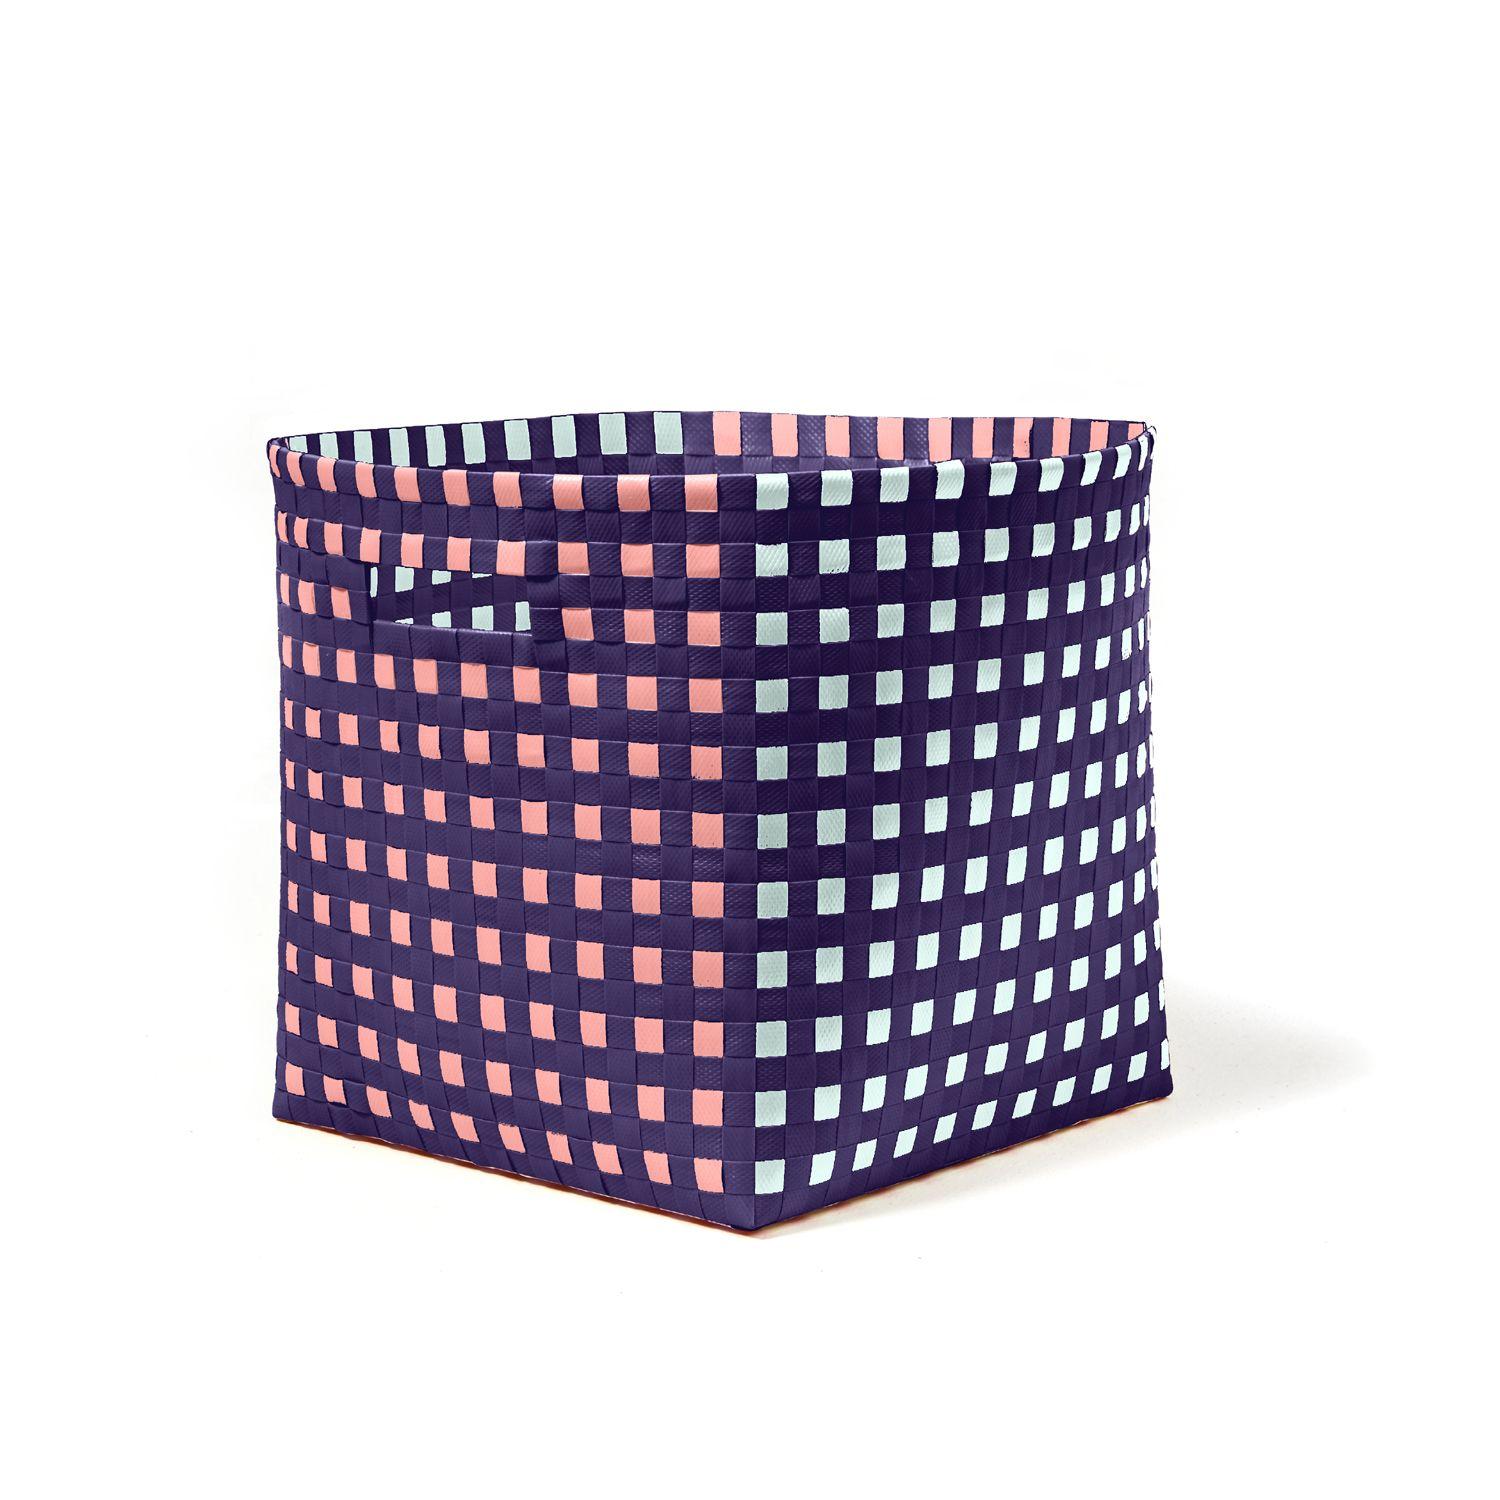 Sunchos basket II by Pauline Deltour.
Materials: 100% recycled Polypropylene.
Dimensions: D 35 x W 35 x H 32 cm.
Available in colors: salmon/ lilac/ turquoise, black/ white, orange/ beige/ pink. Available in other sizes.

The Suncho box is a